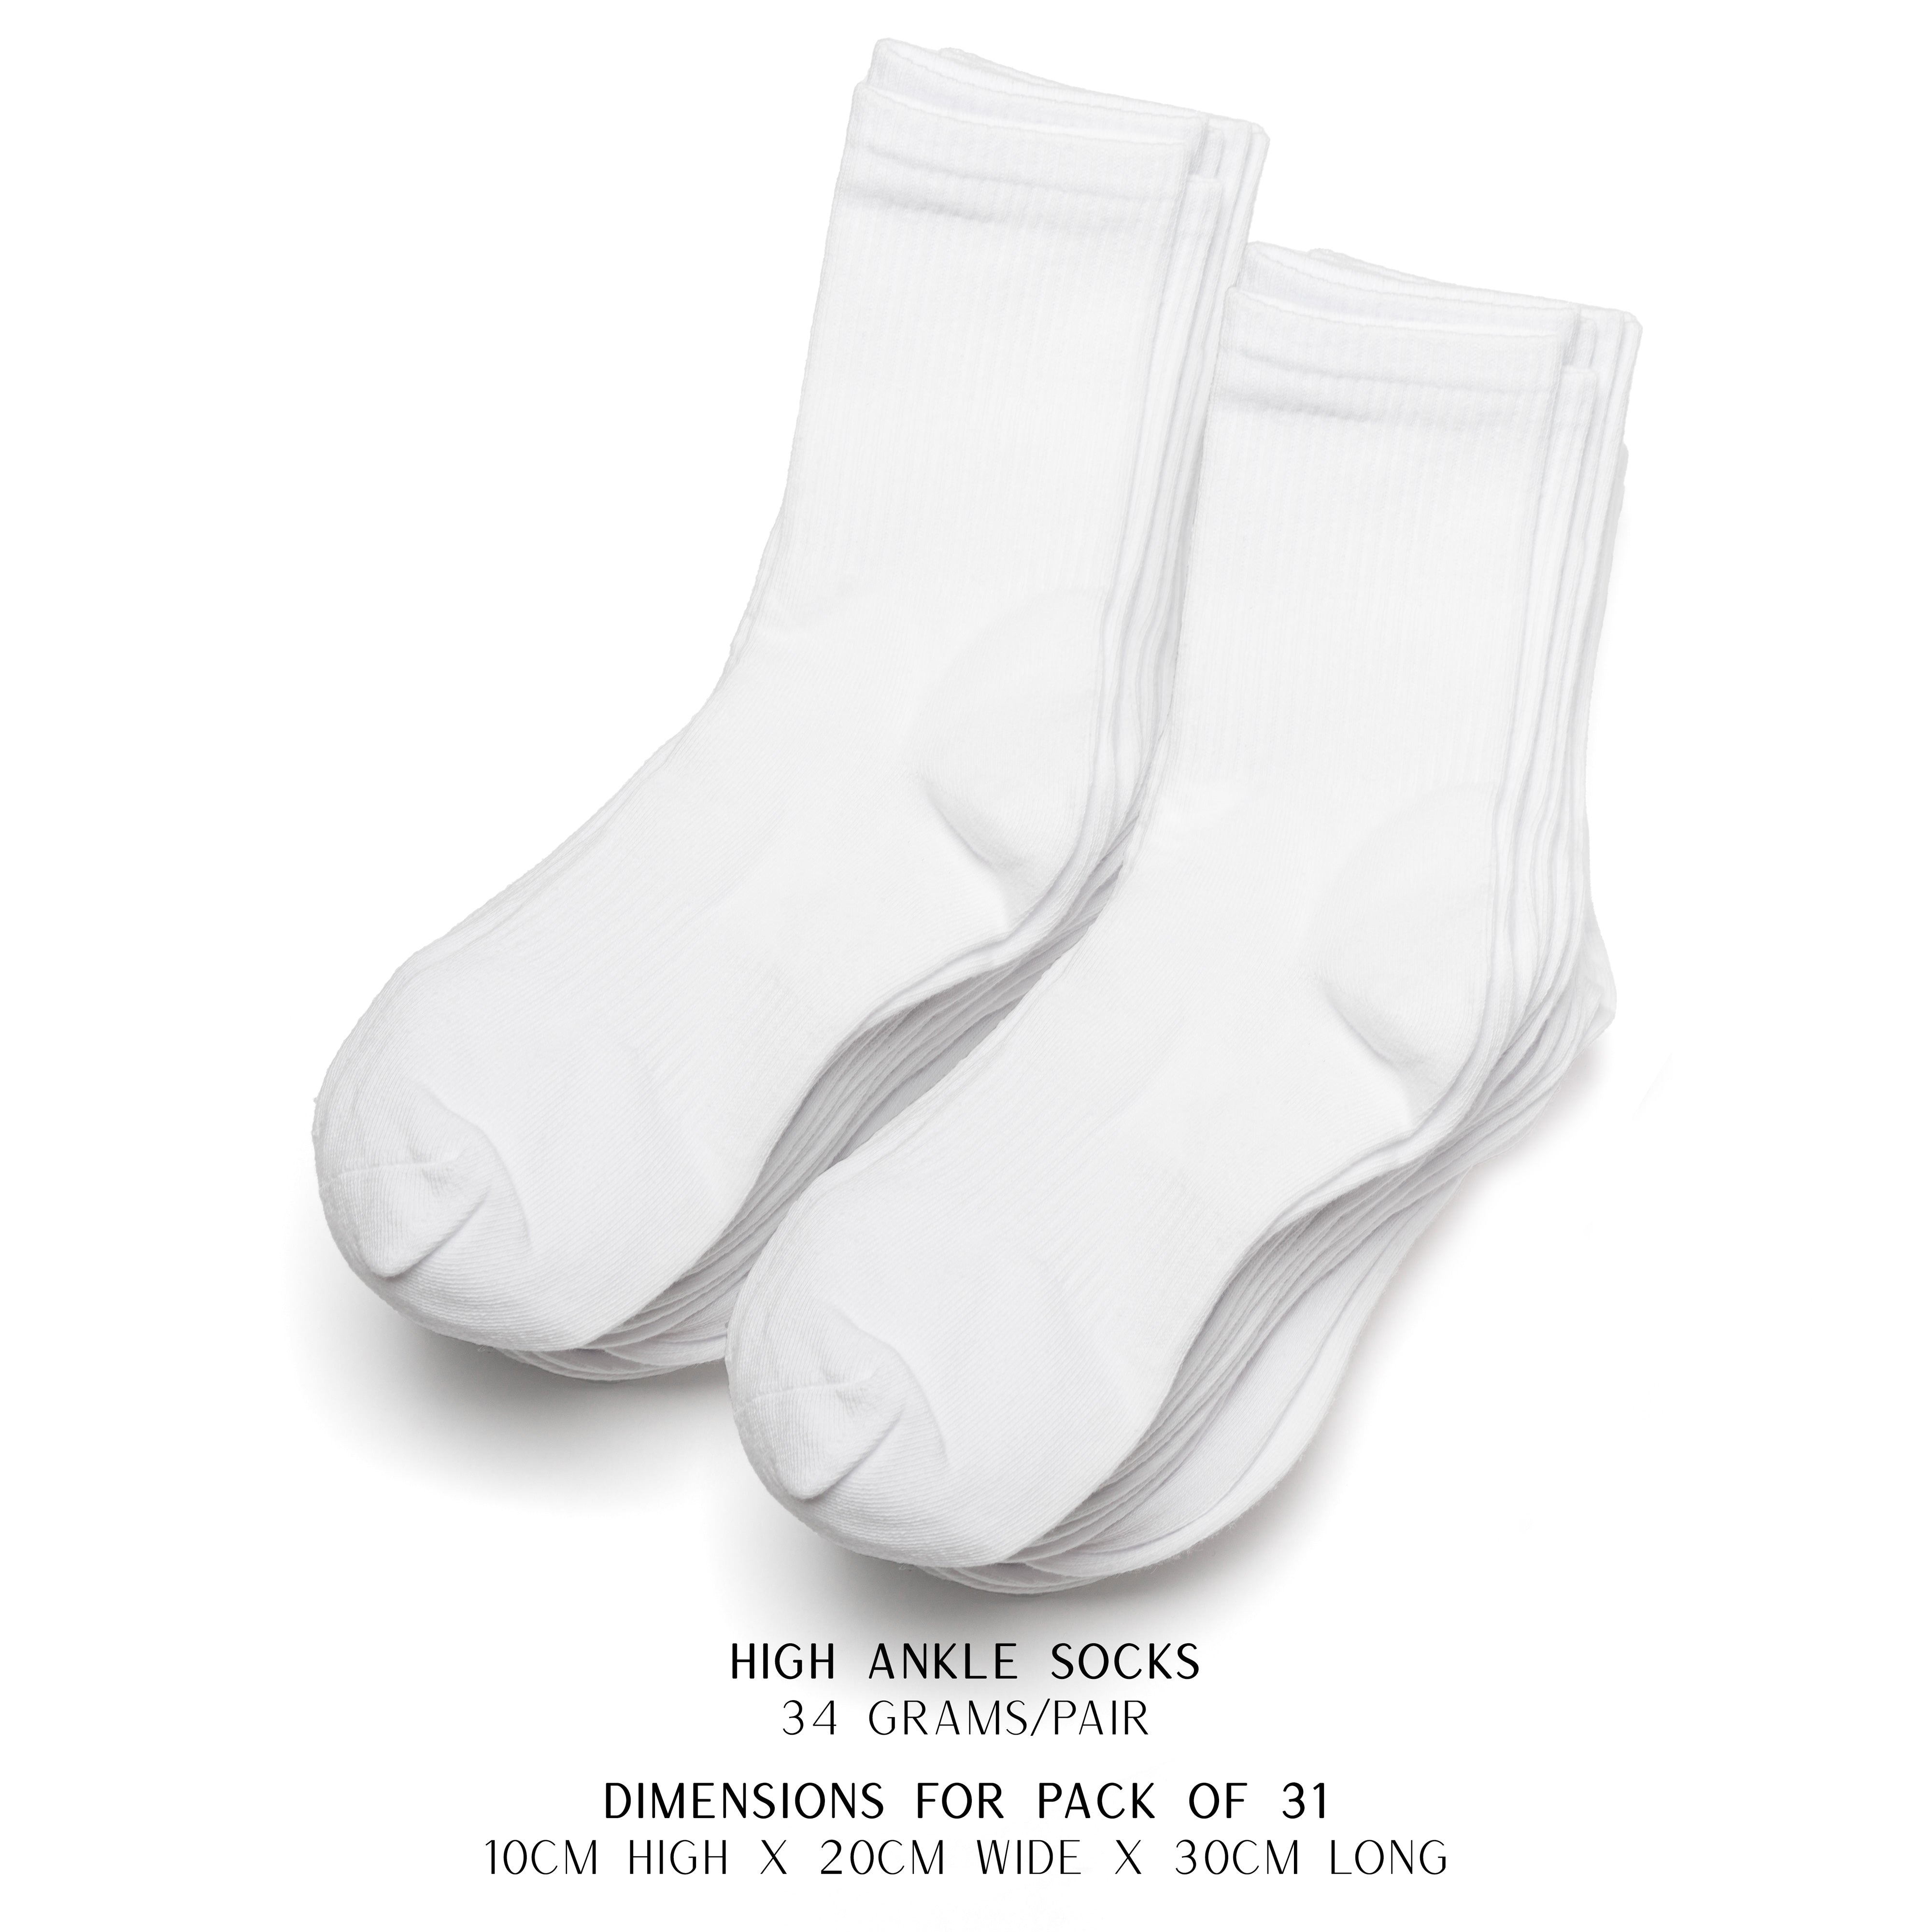 31 Pairs of High Cotton High Ankle Men's Socks with Antifungal Powder - New Socks Daily